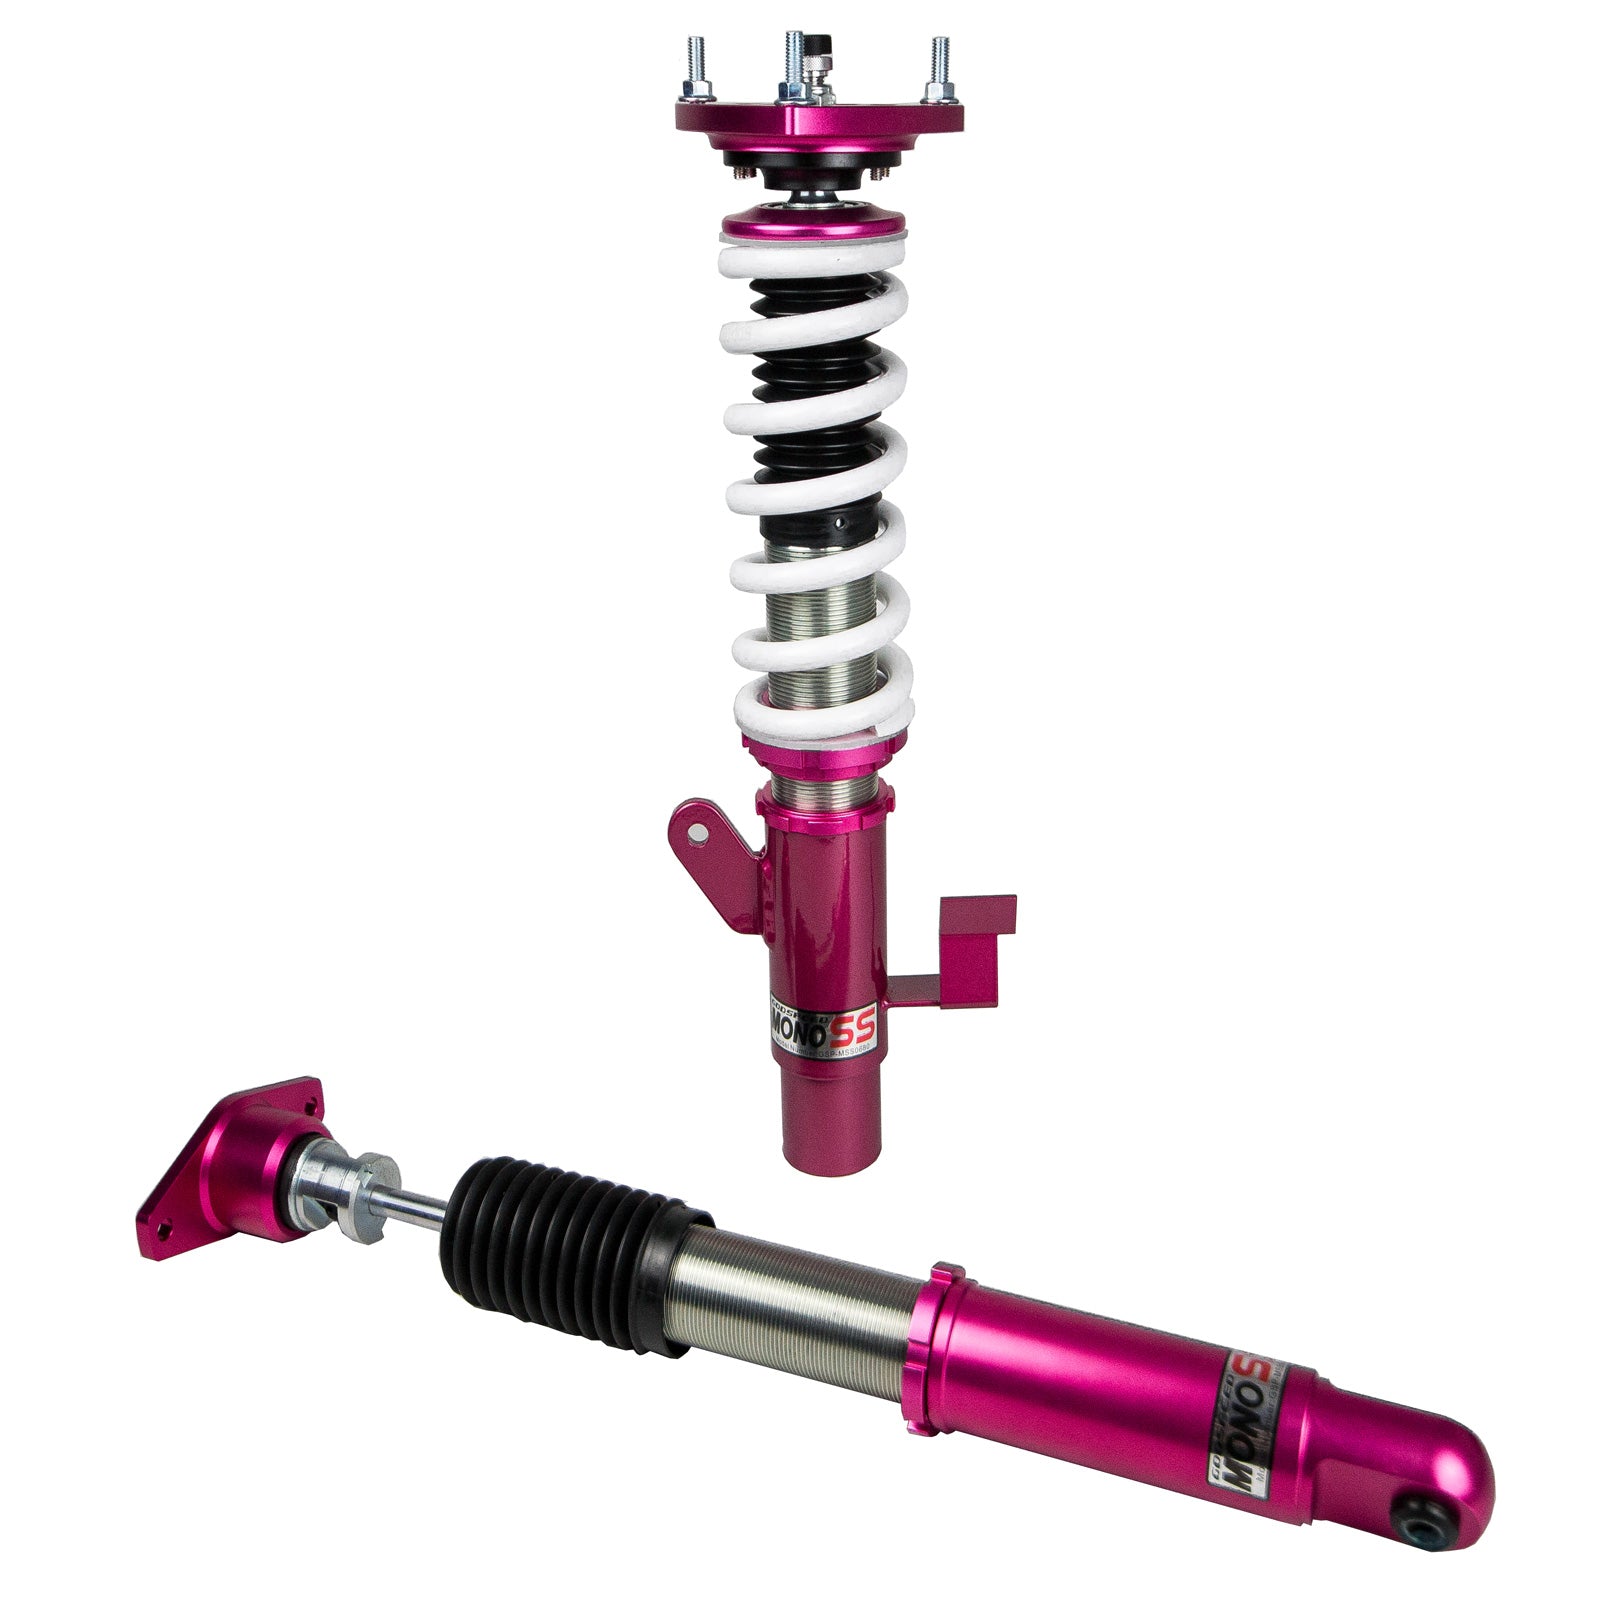 Godspeed MSS0680-B MonoSS Coilover Lowering Kit, Fully Adjustable, Ride Height, Spring Tension And 16 Click Damping, Mazda Mazdaspeed 3(BL) 2010-13